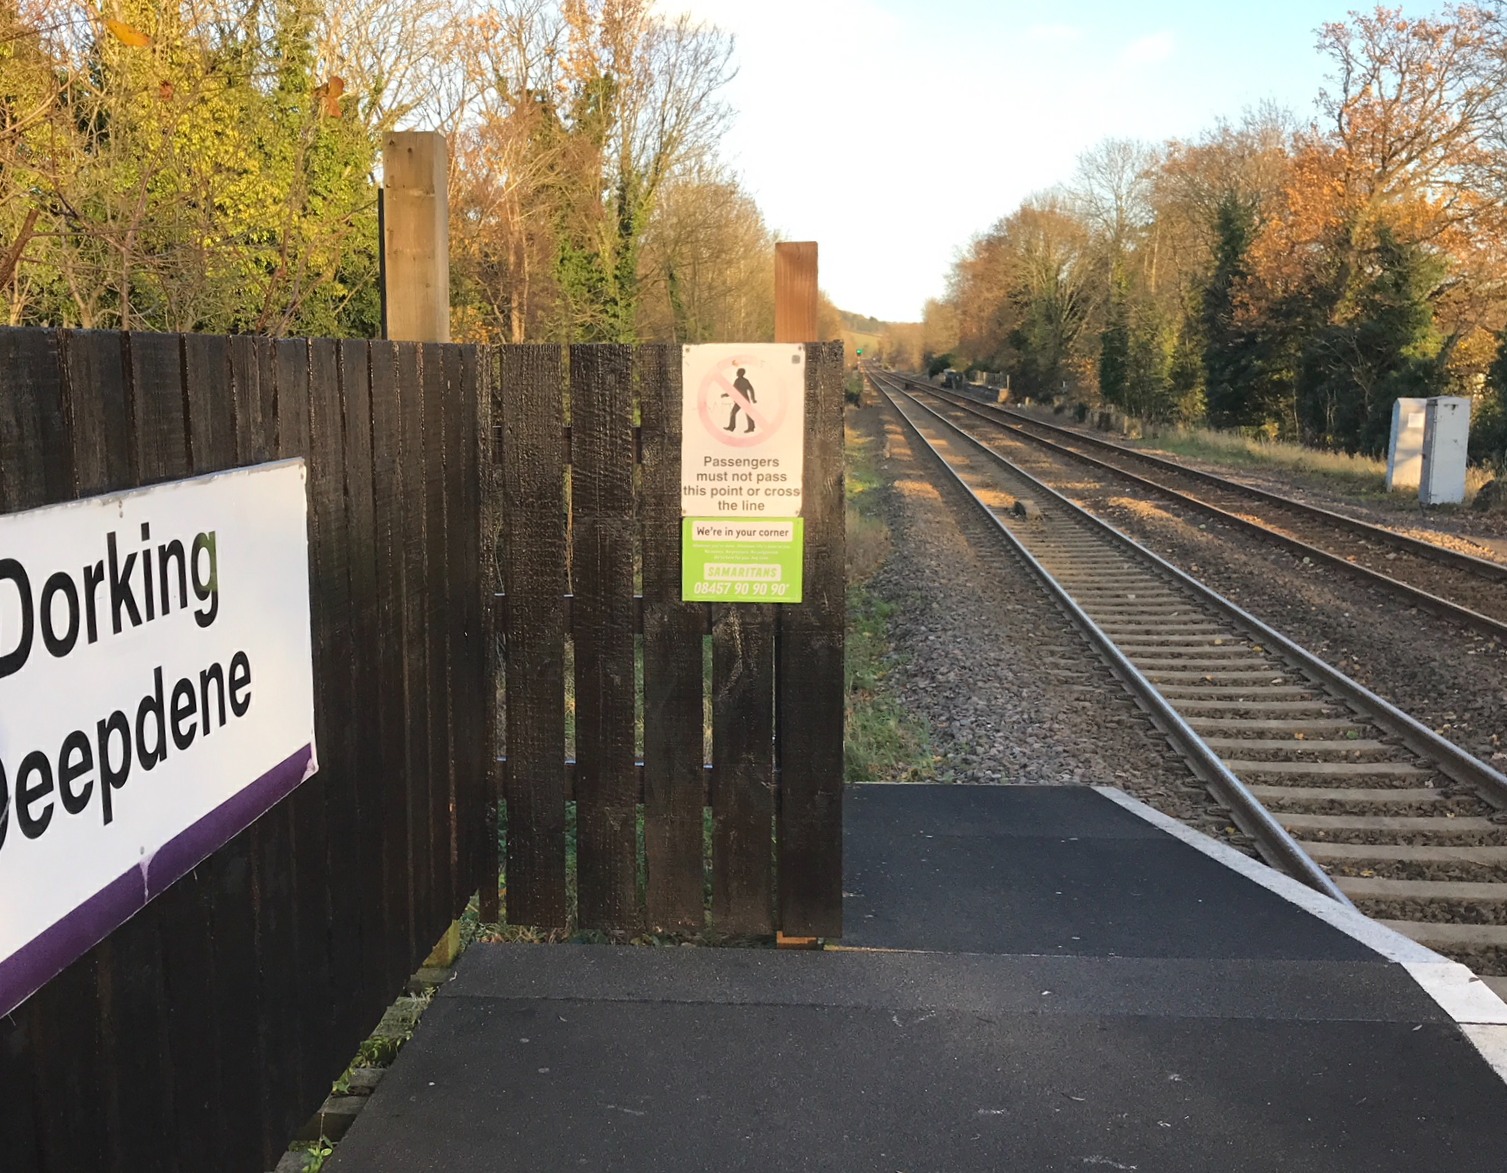 Small Talk Saves Lives: In situ at the end of Dorking Deepdene Station.